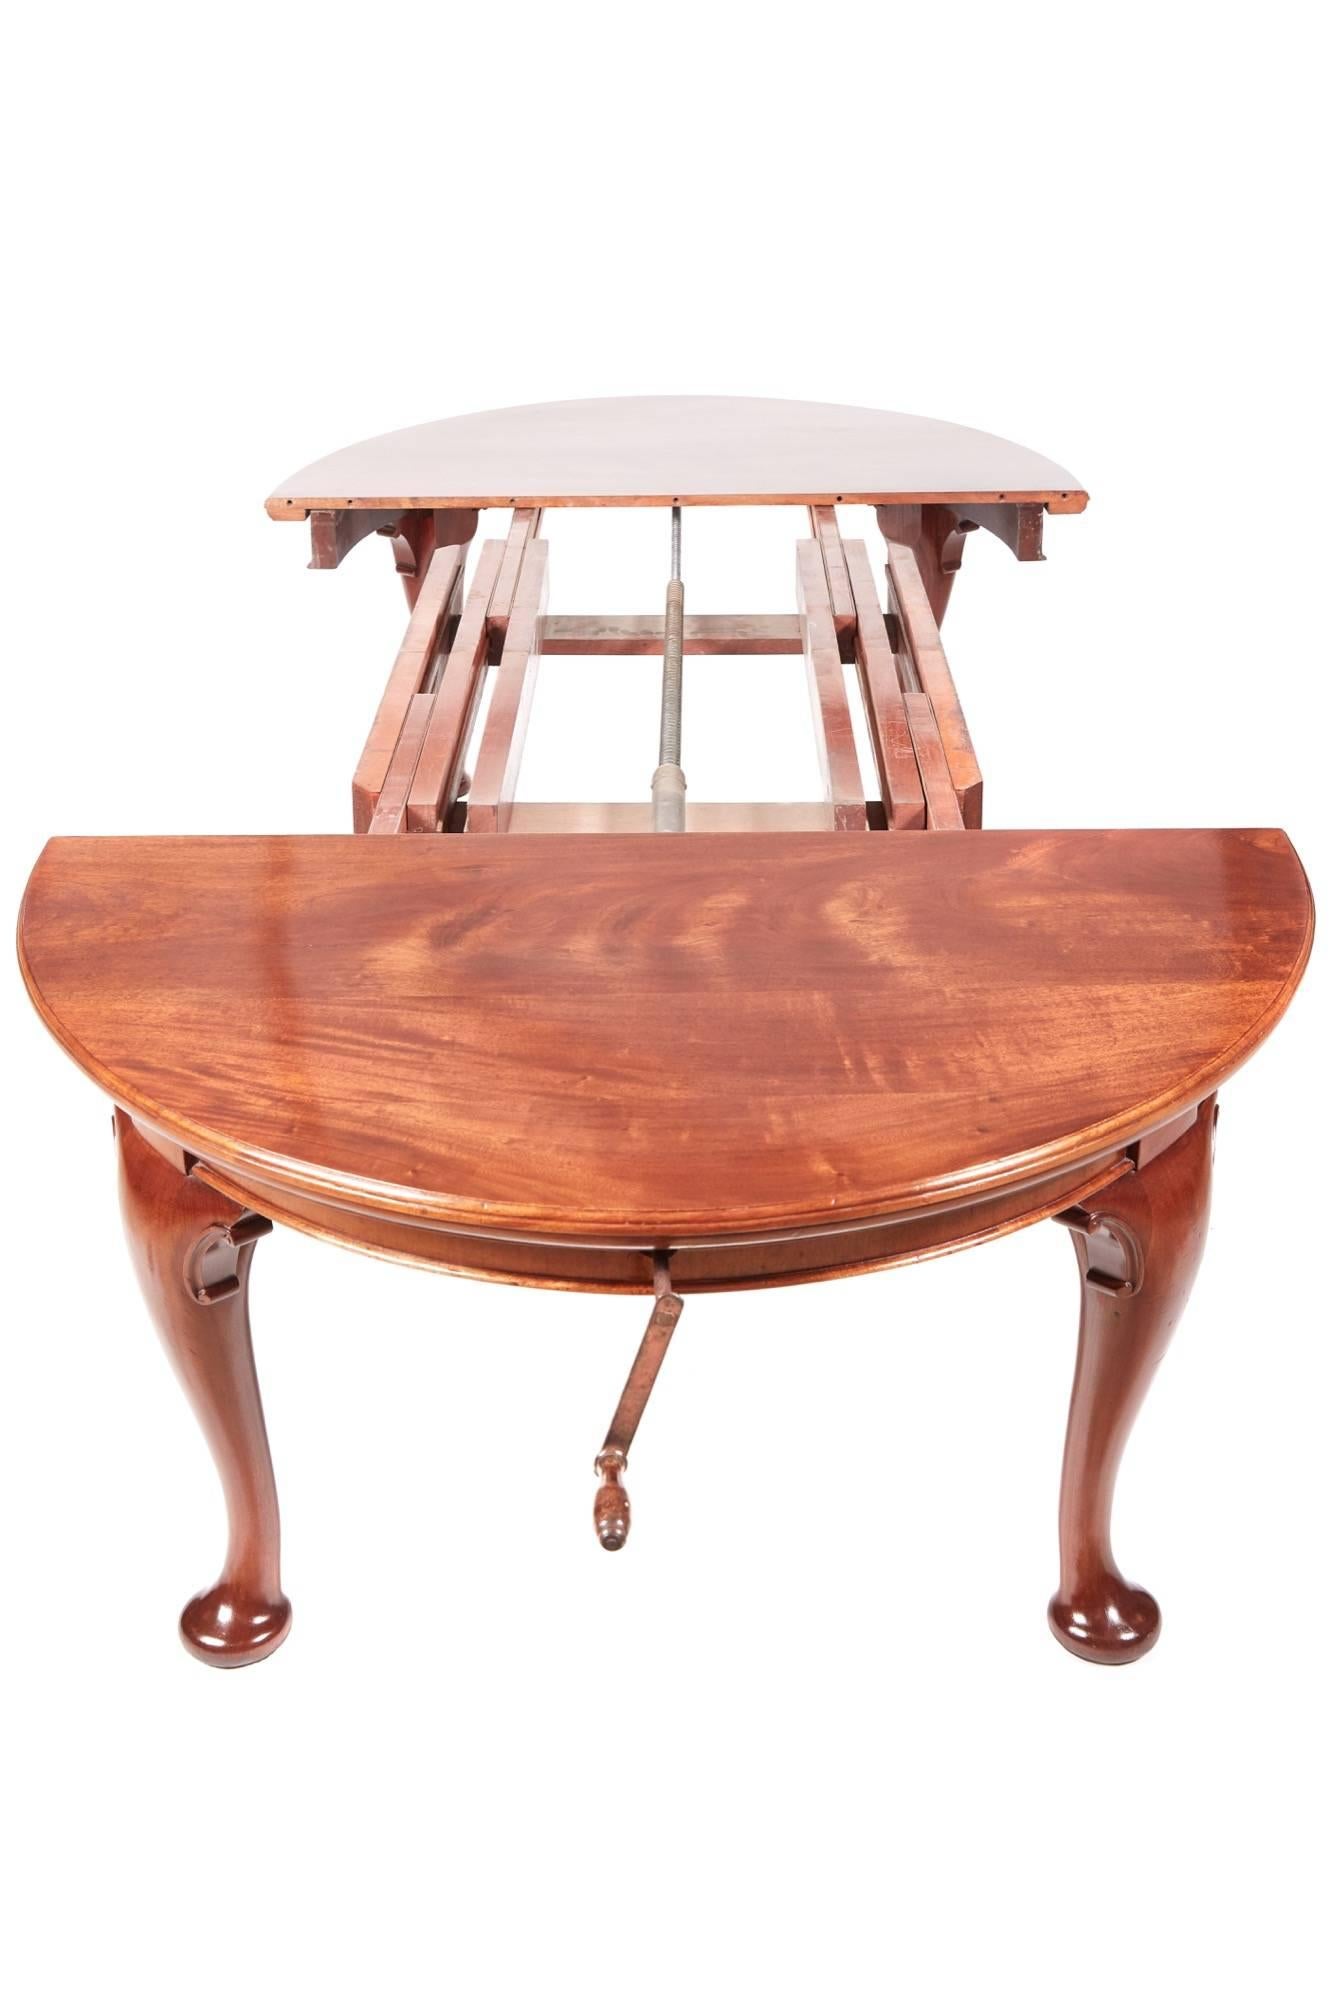 Fantastic quality antique mahogany extending dining table, with a fantastic solid mahogany top, three original extra leaves all having a frieze and features a winding mechanism with original winding handle, standing on lovely solid mahogany shaped